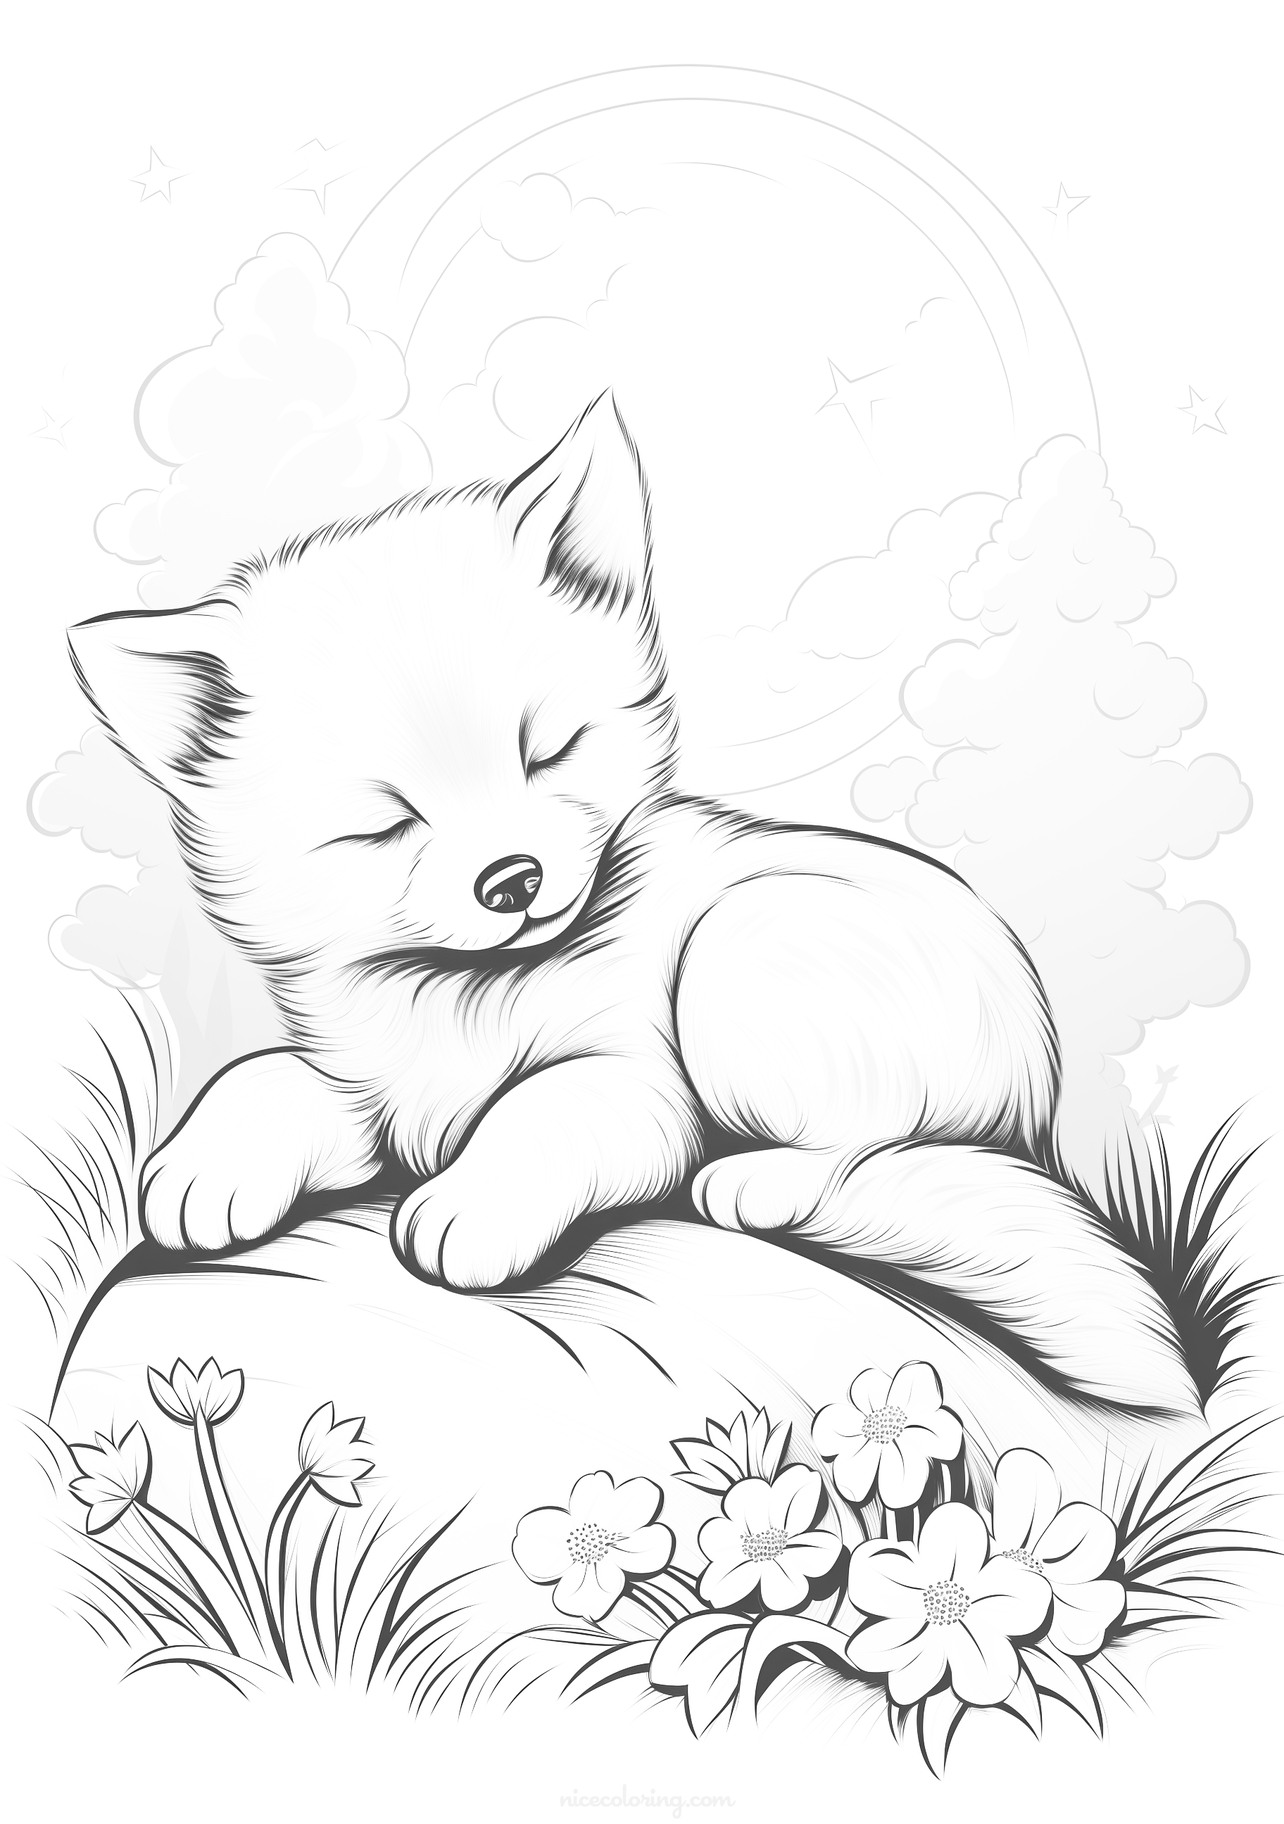 Sleeping puppy on a rock surrounded by flowers coloring page